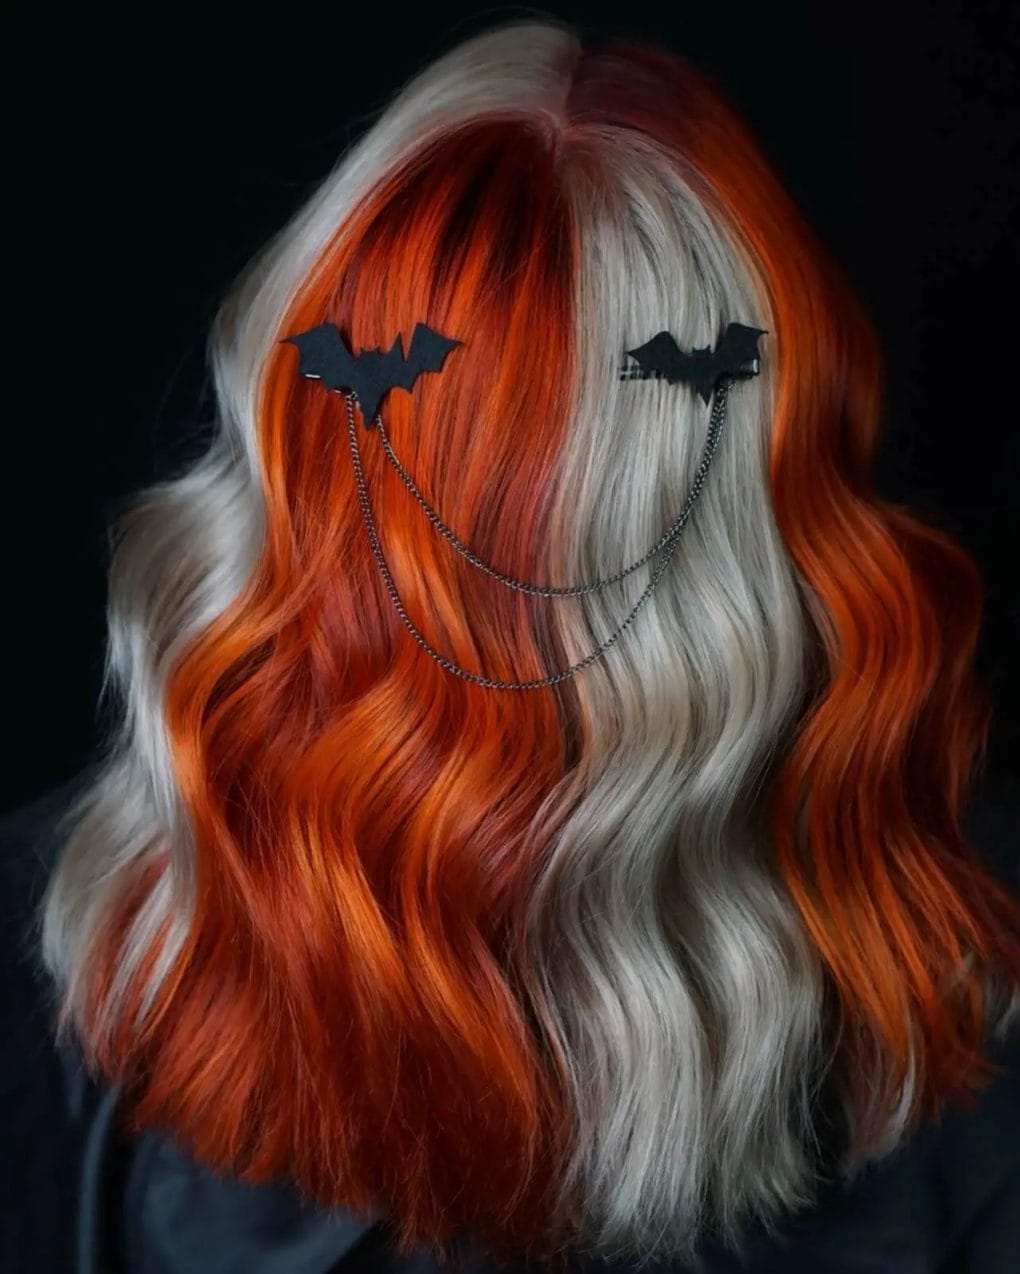 Autumnal fiery gradient from platinum blonde to orange and red waves.